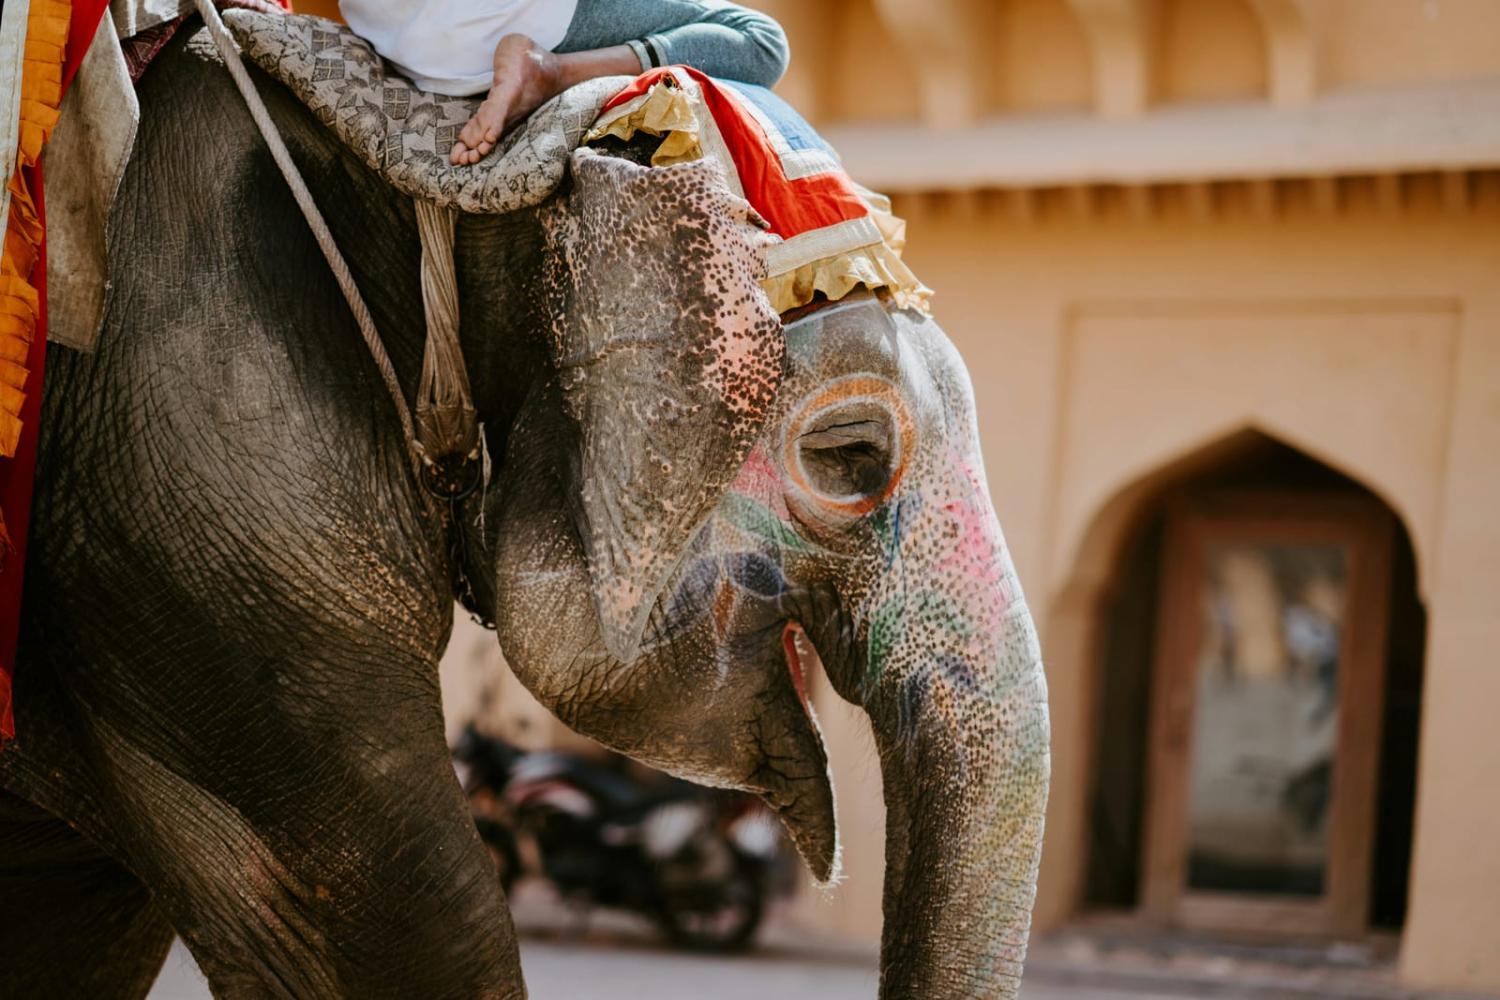 Not so much a cliché image of India when an elephant is rolling down a hill? (Annie Spratt/Unsplash)